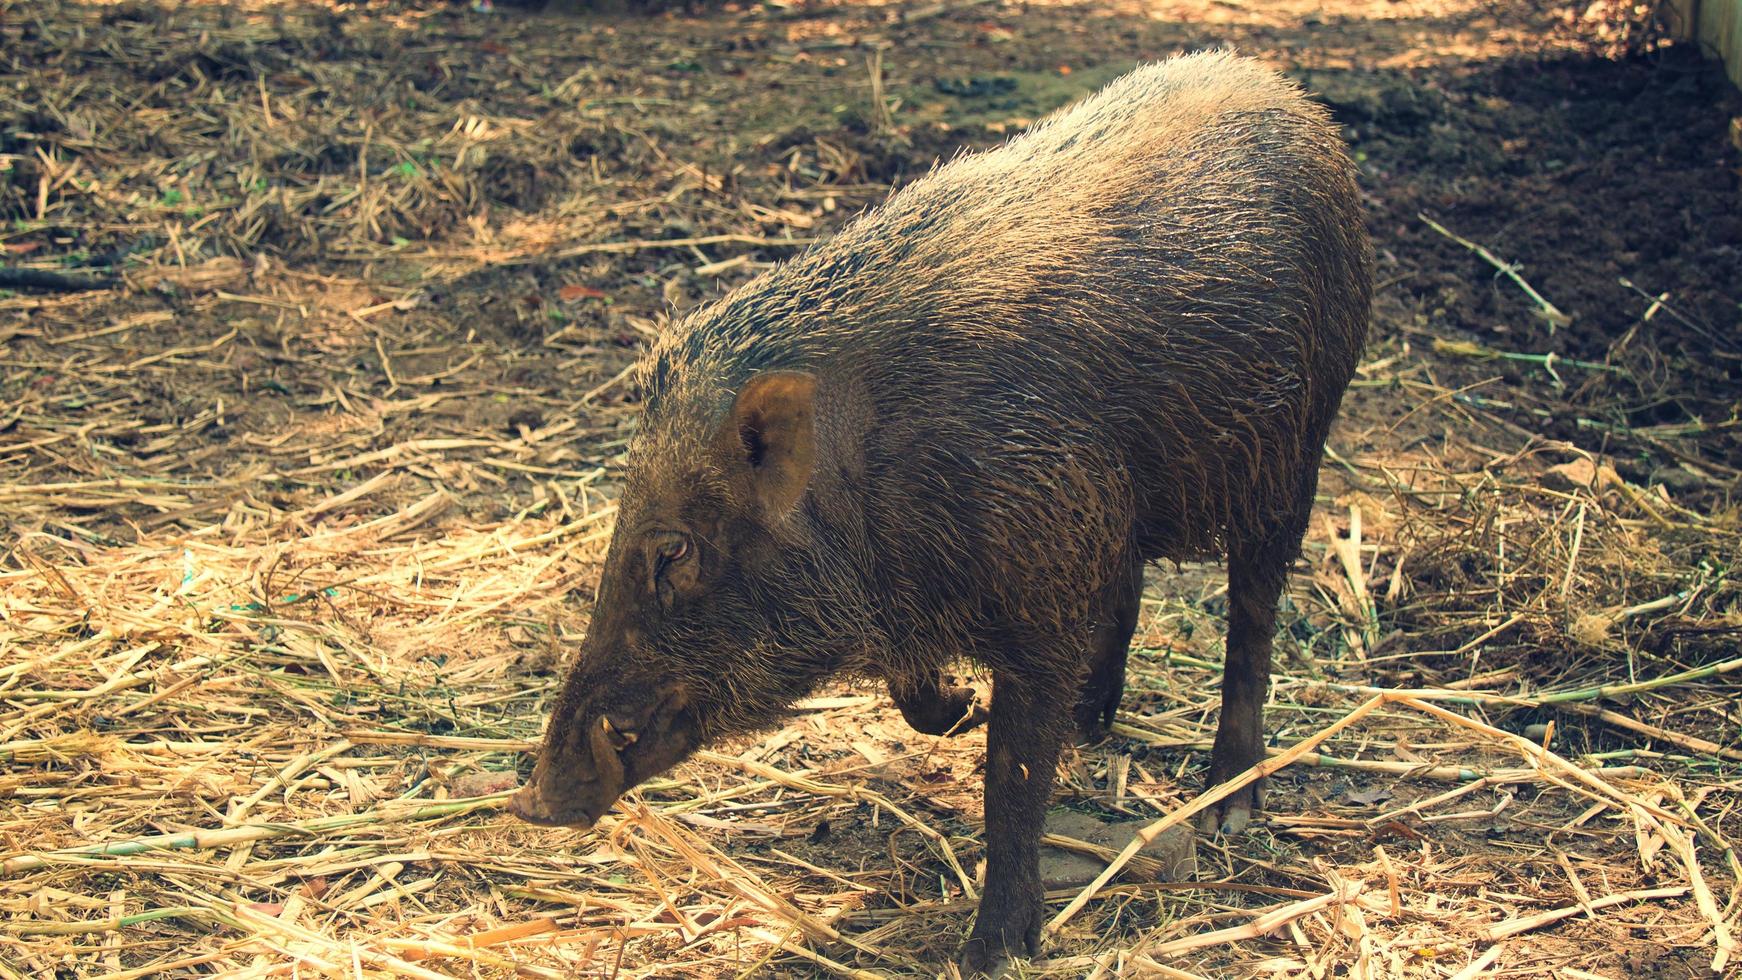 Wild boar sightings in the nature photo